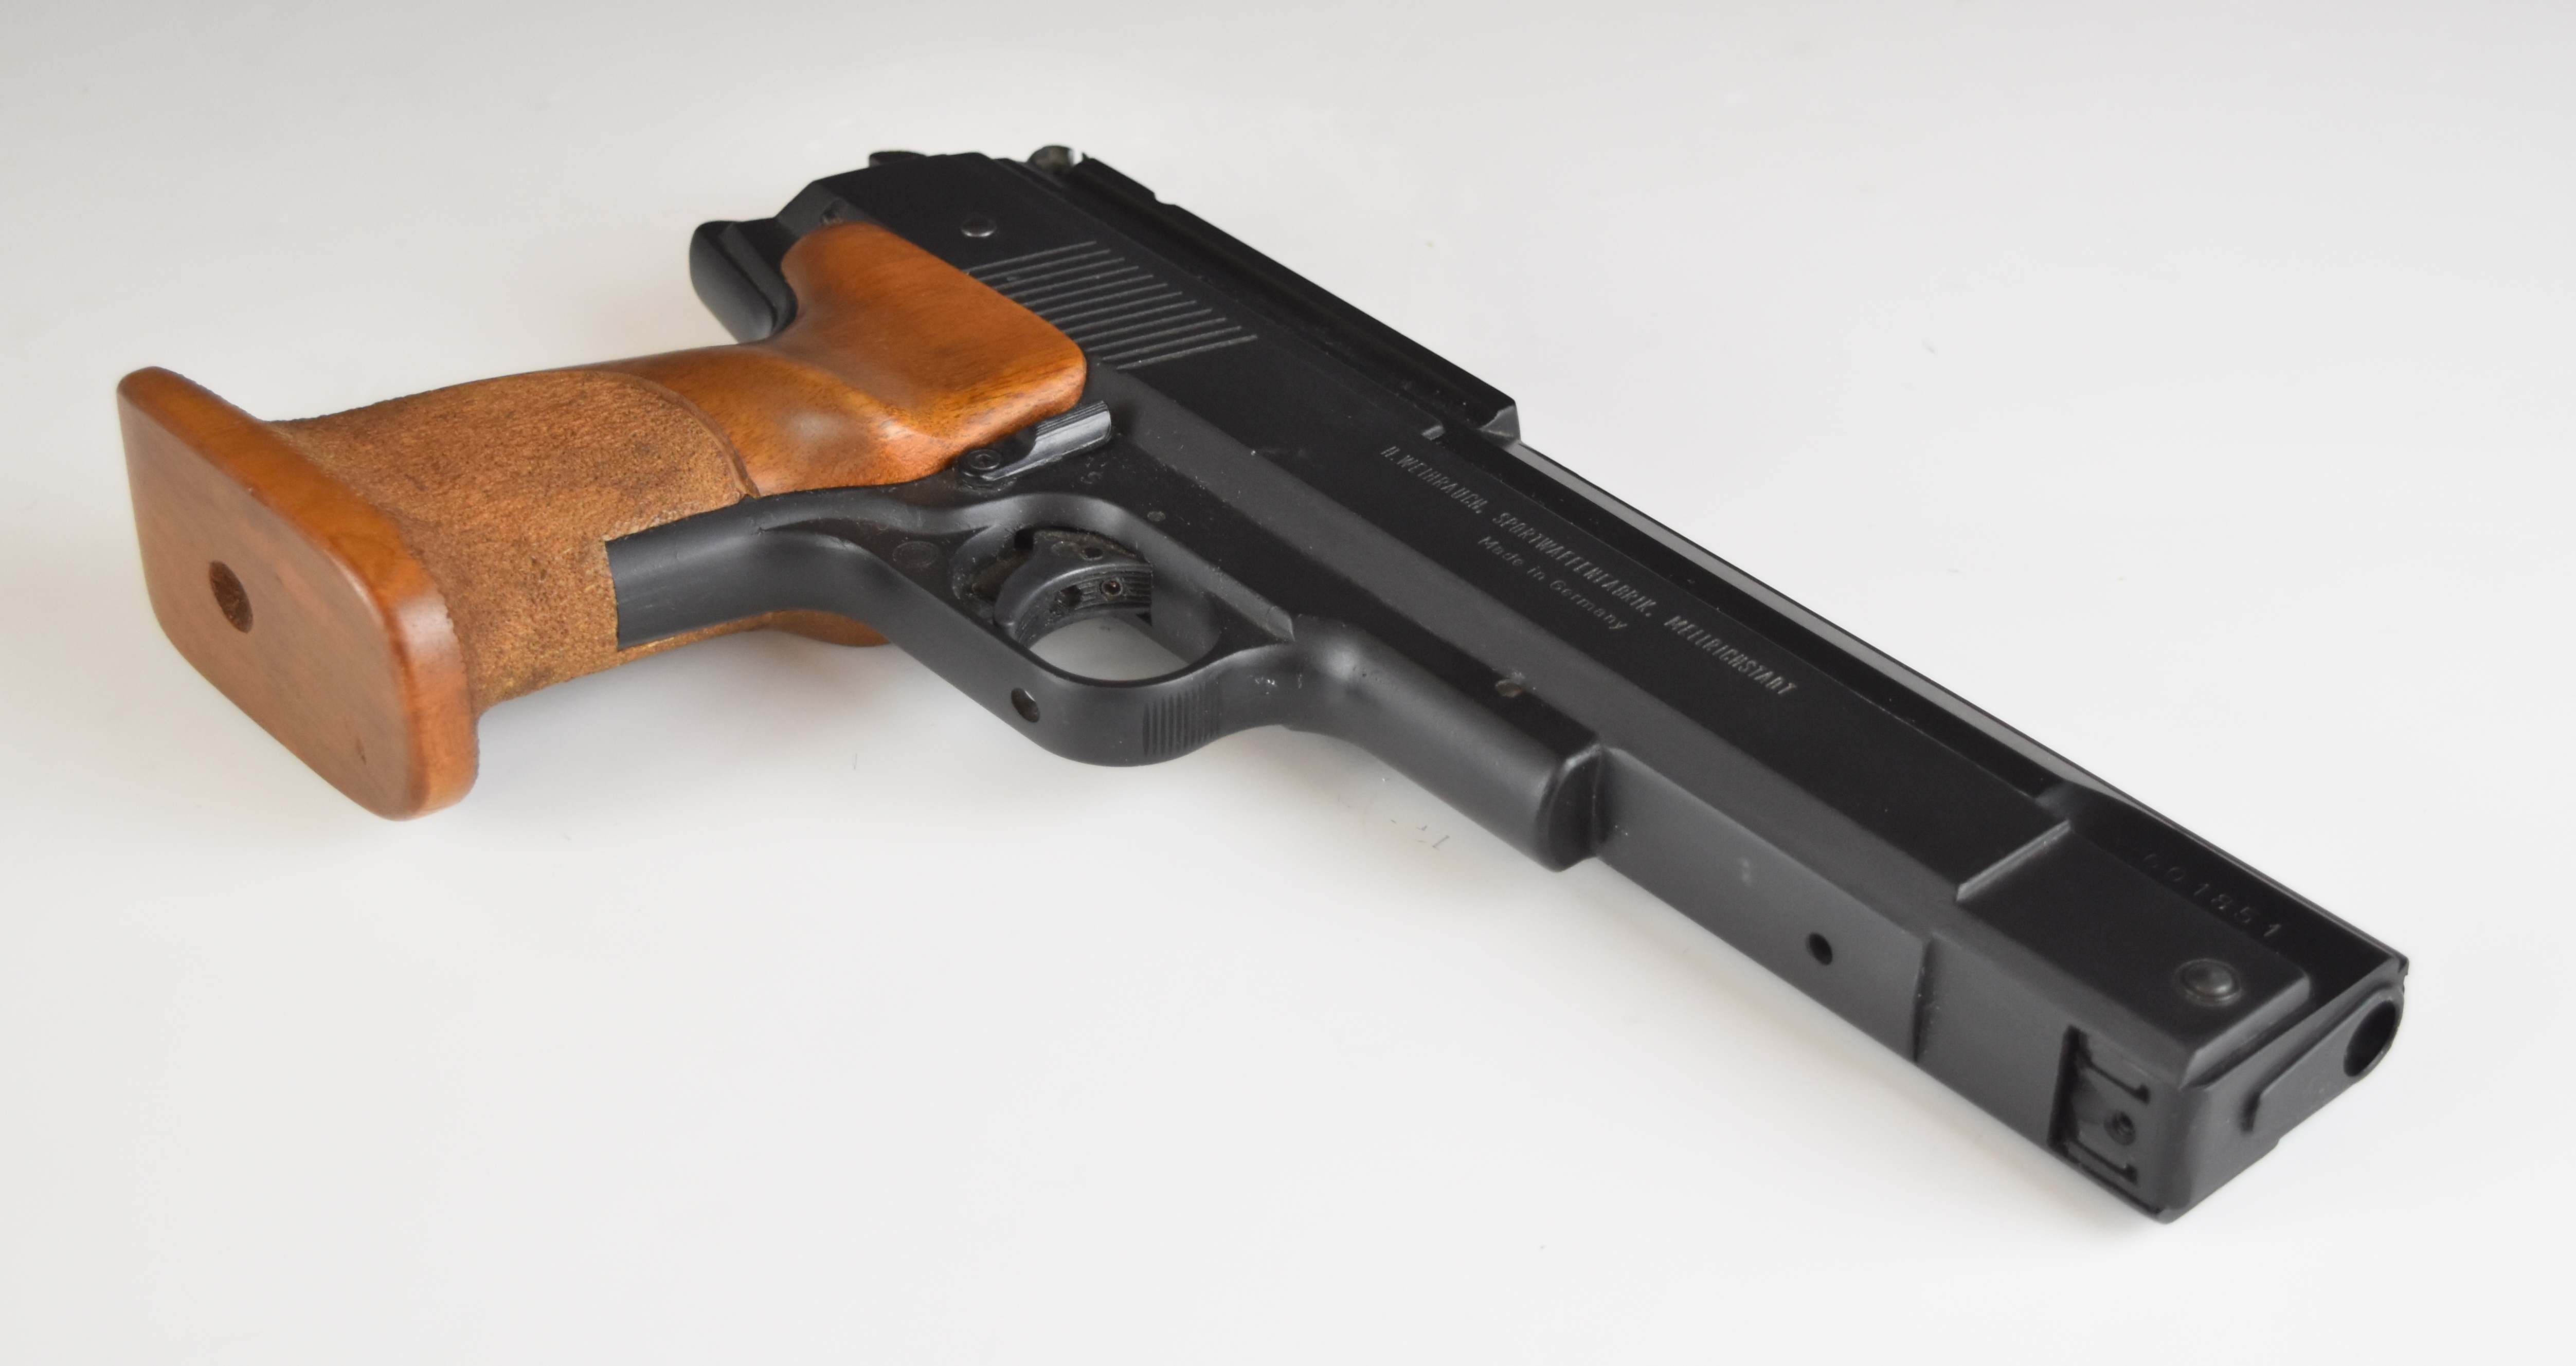 Weihrauch HW75 .177 air pistol with shaped and textured wooden grips and adjustable sights and - Image 4 of 12